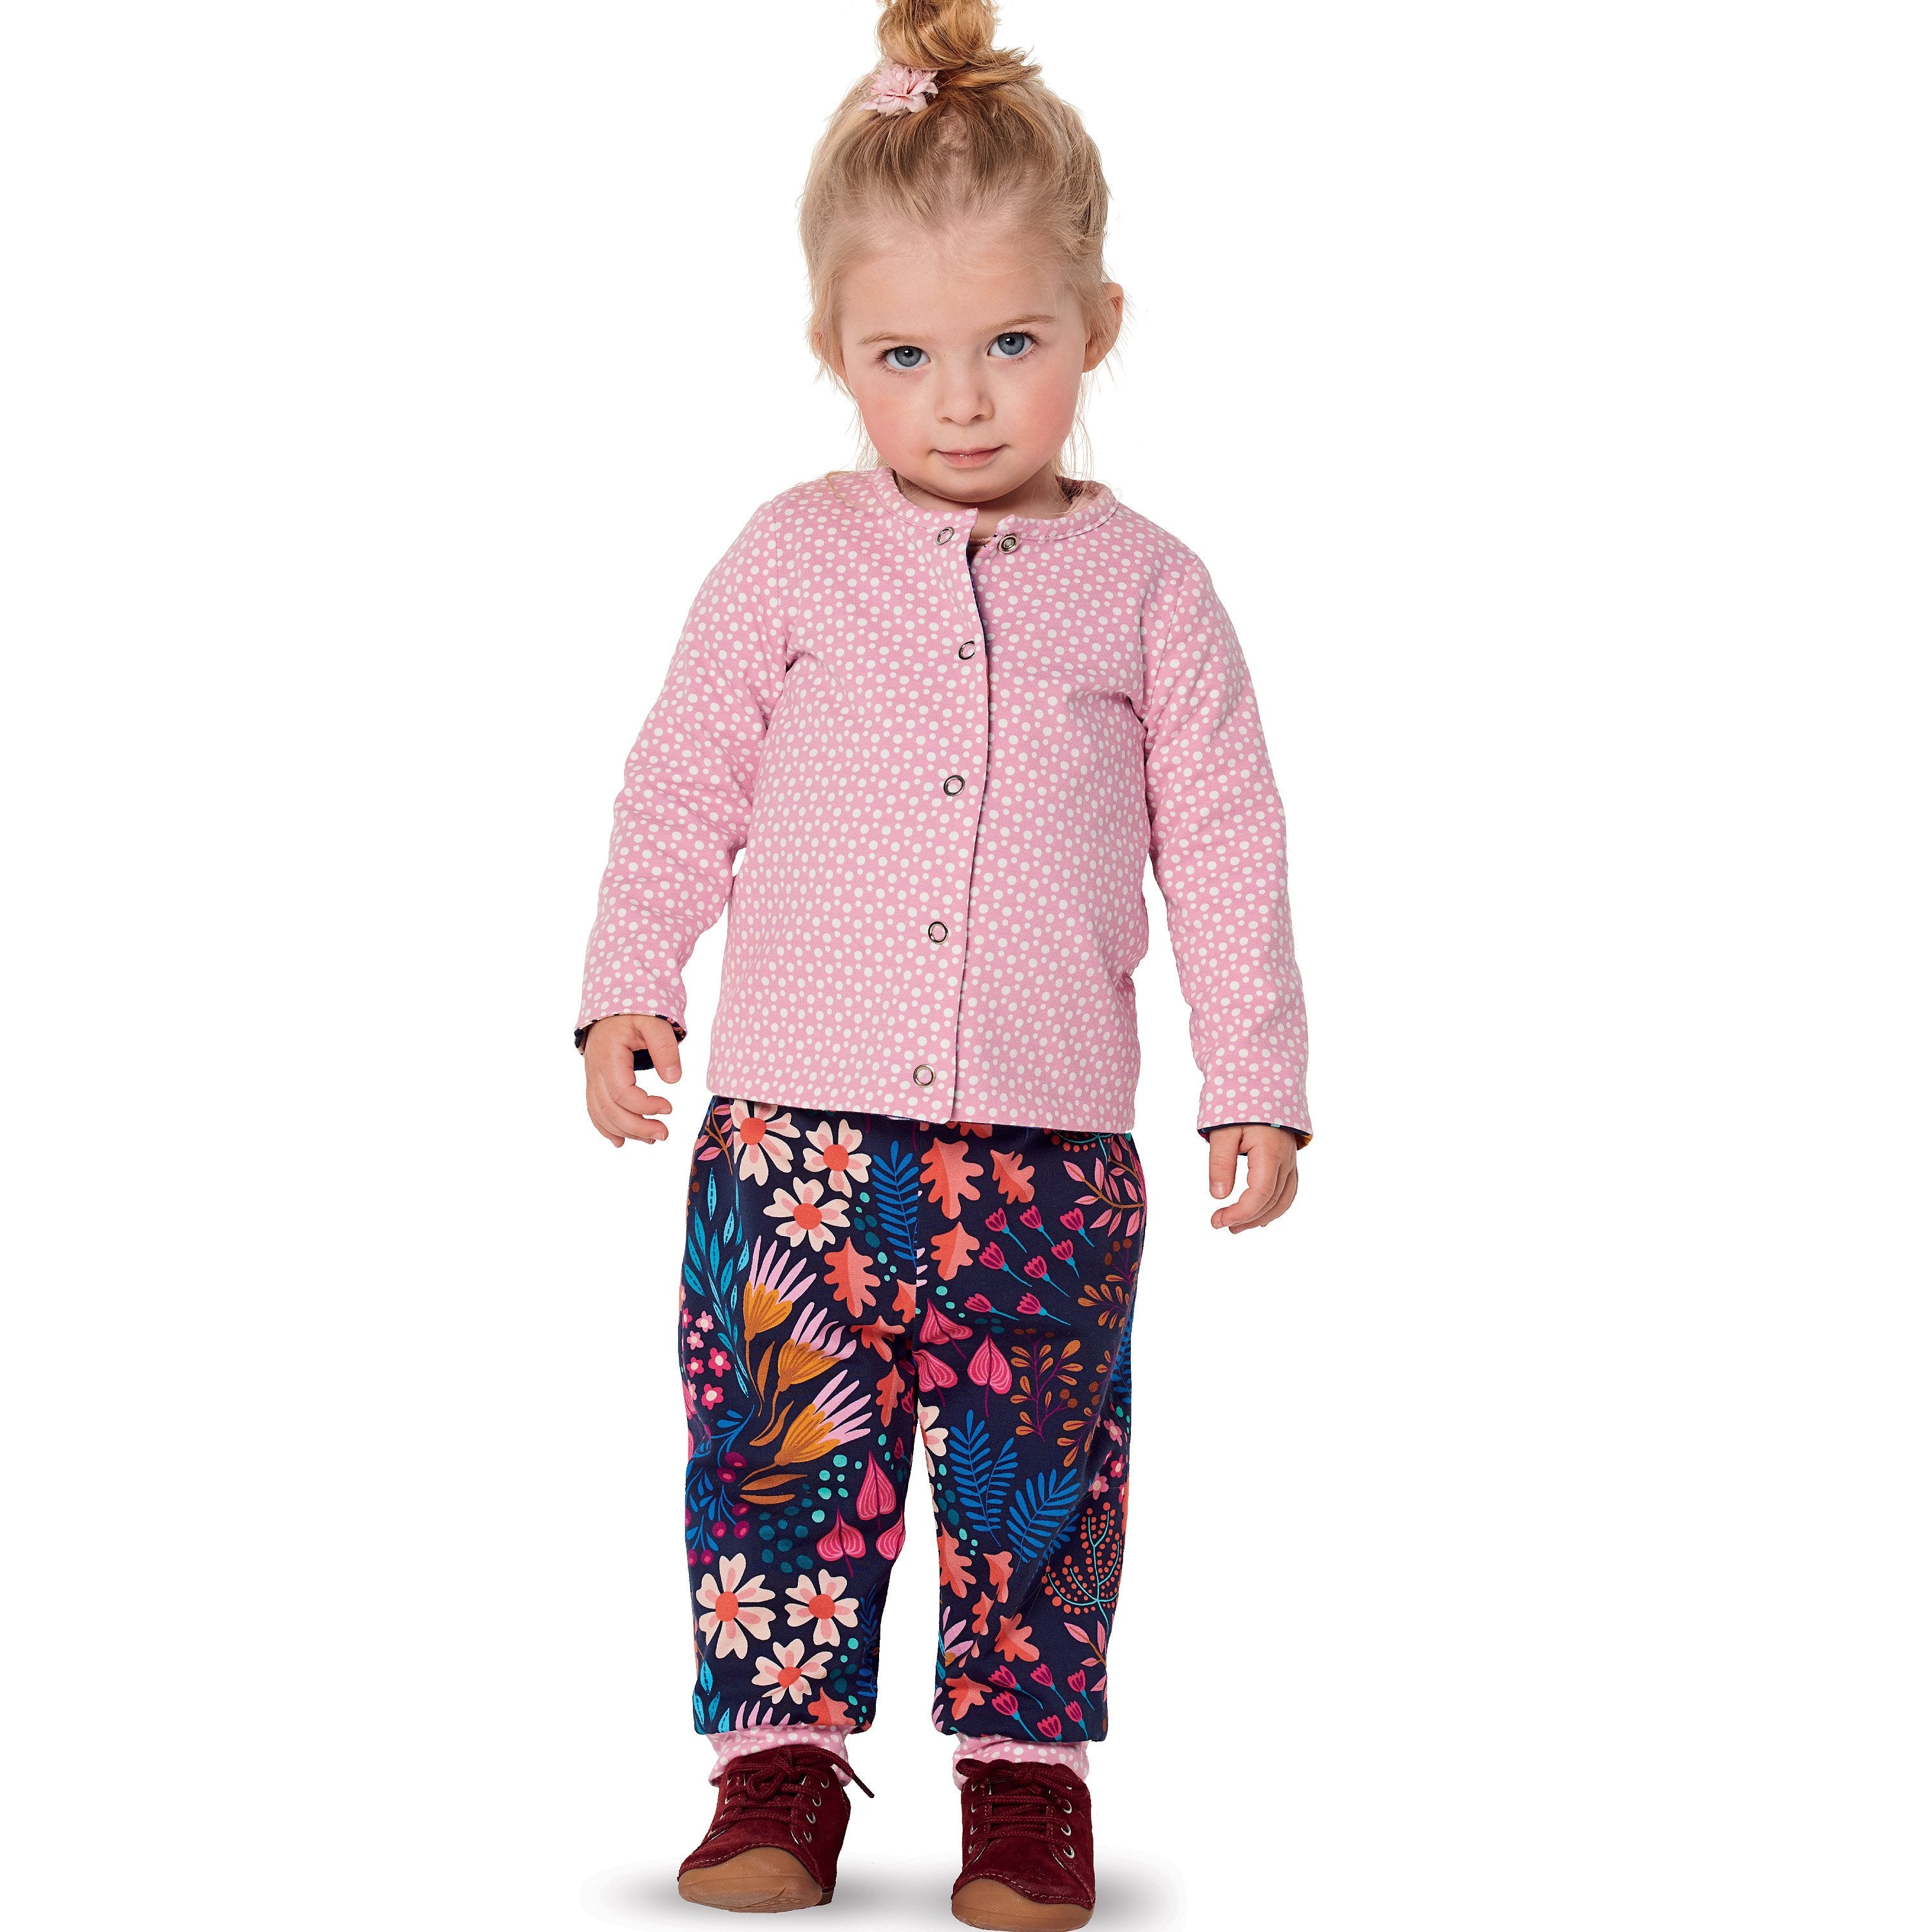 Burda Pattern 9293 Babies' Reversible Jacket and trousers from Jaycotts Sewing Supplies